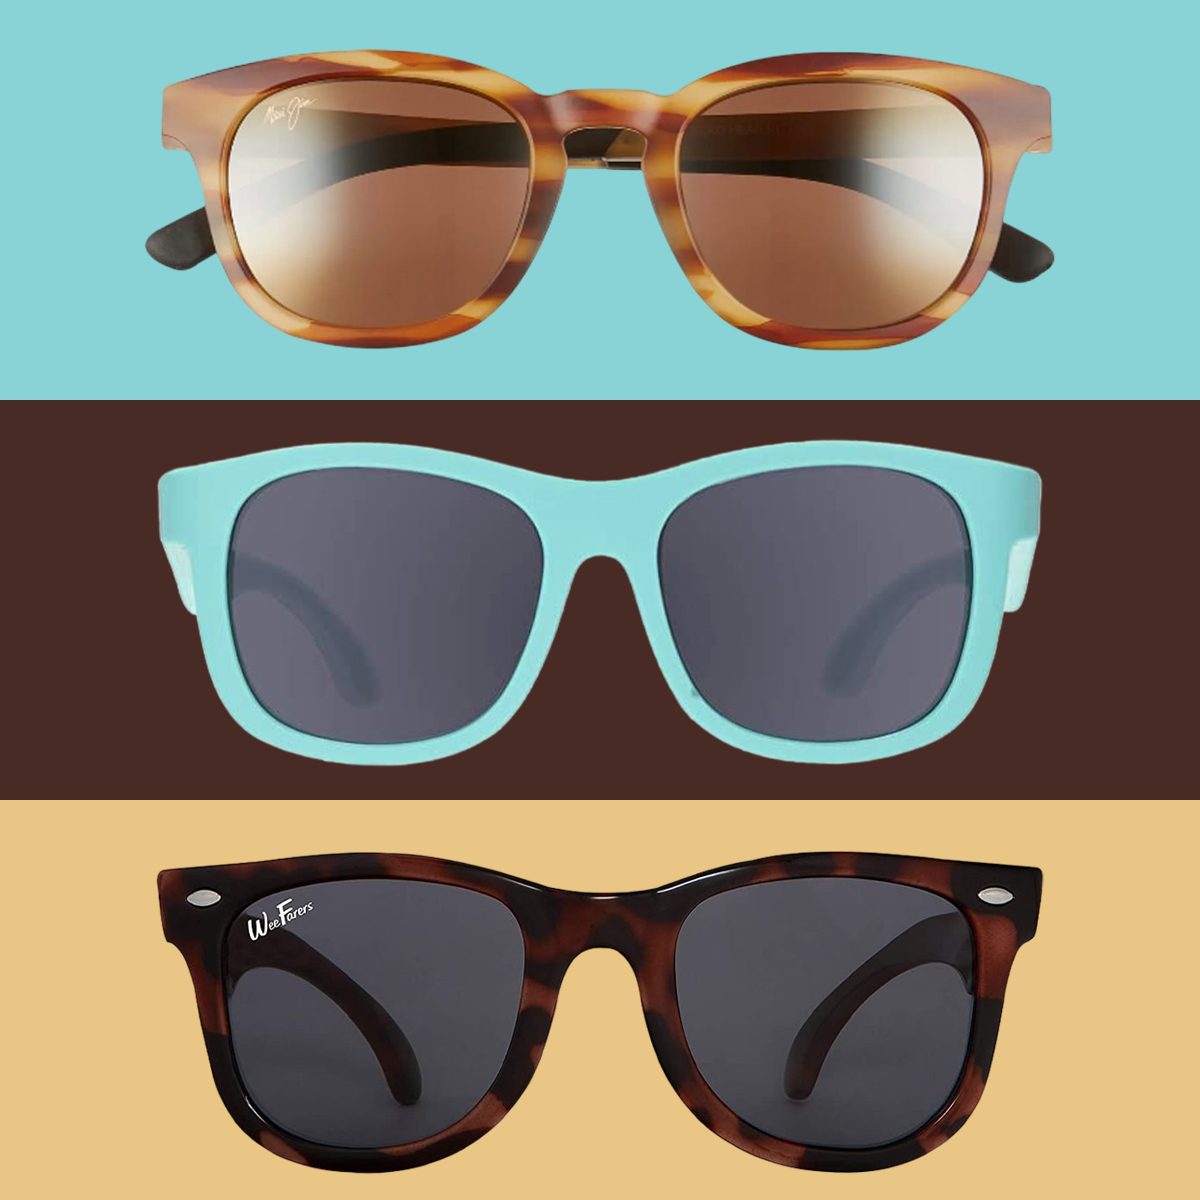 9 Sunglasses To Keep You Cool In The Heat